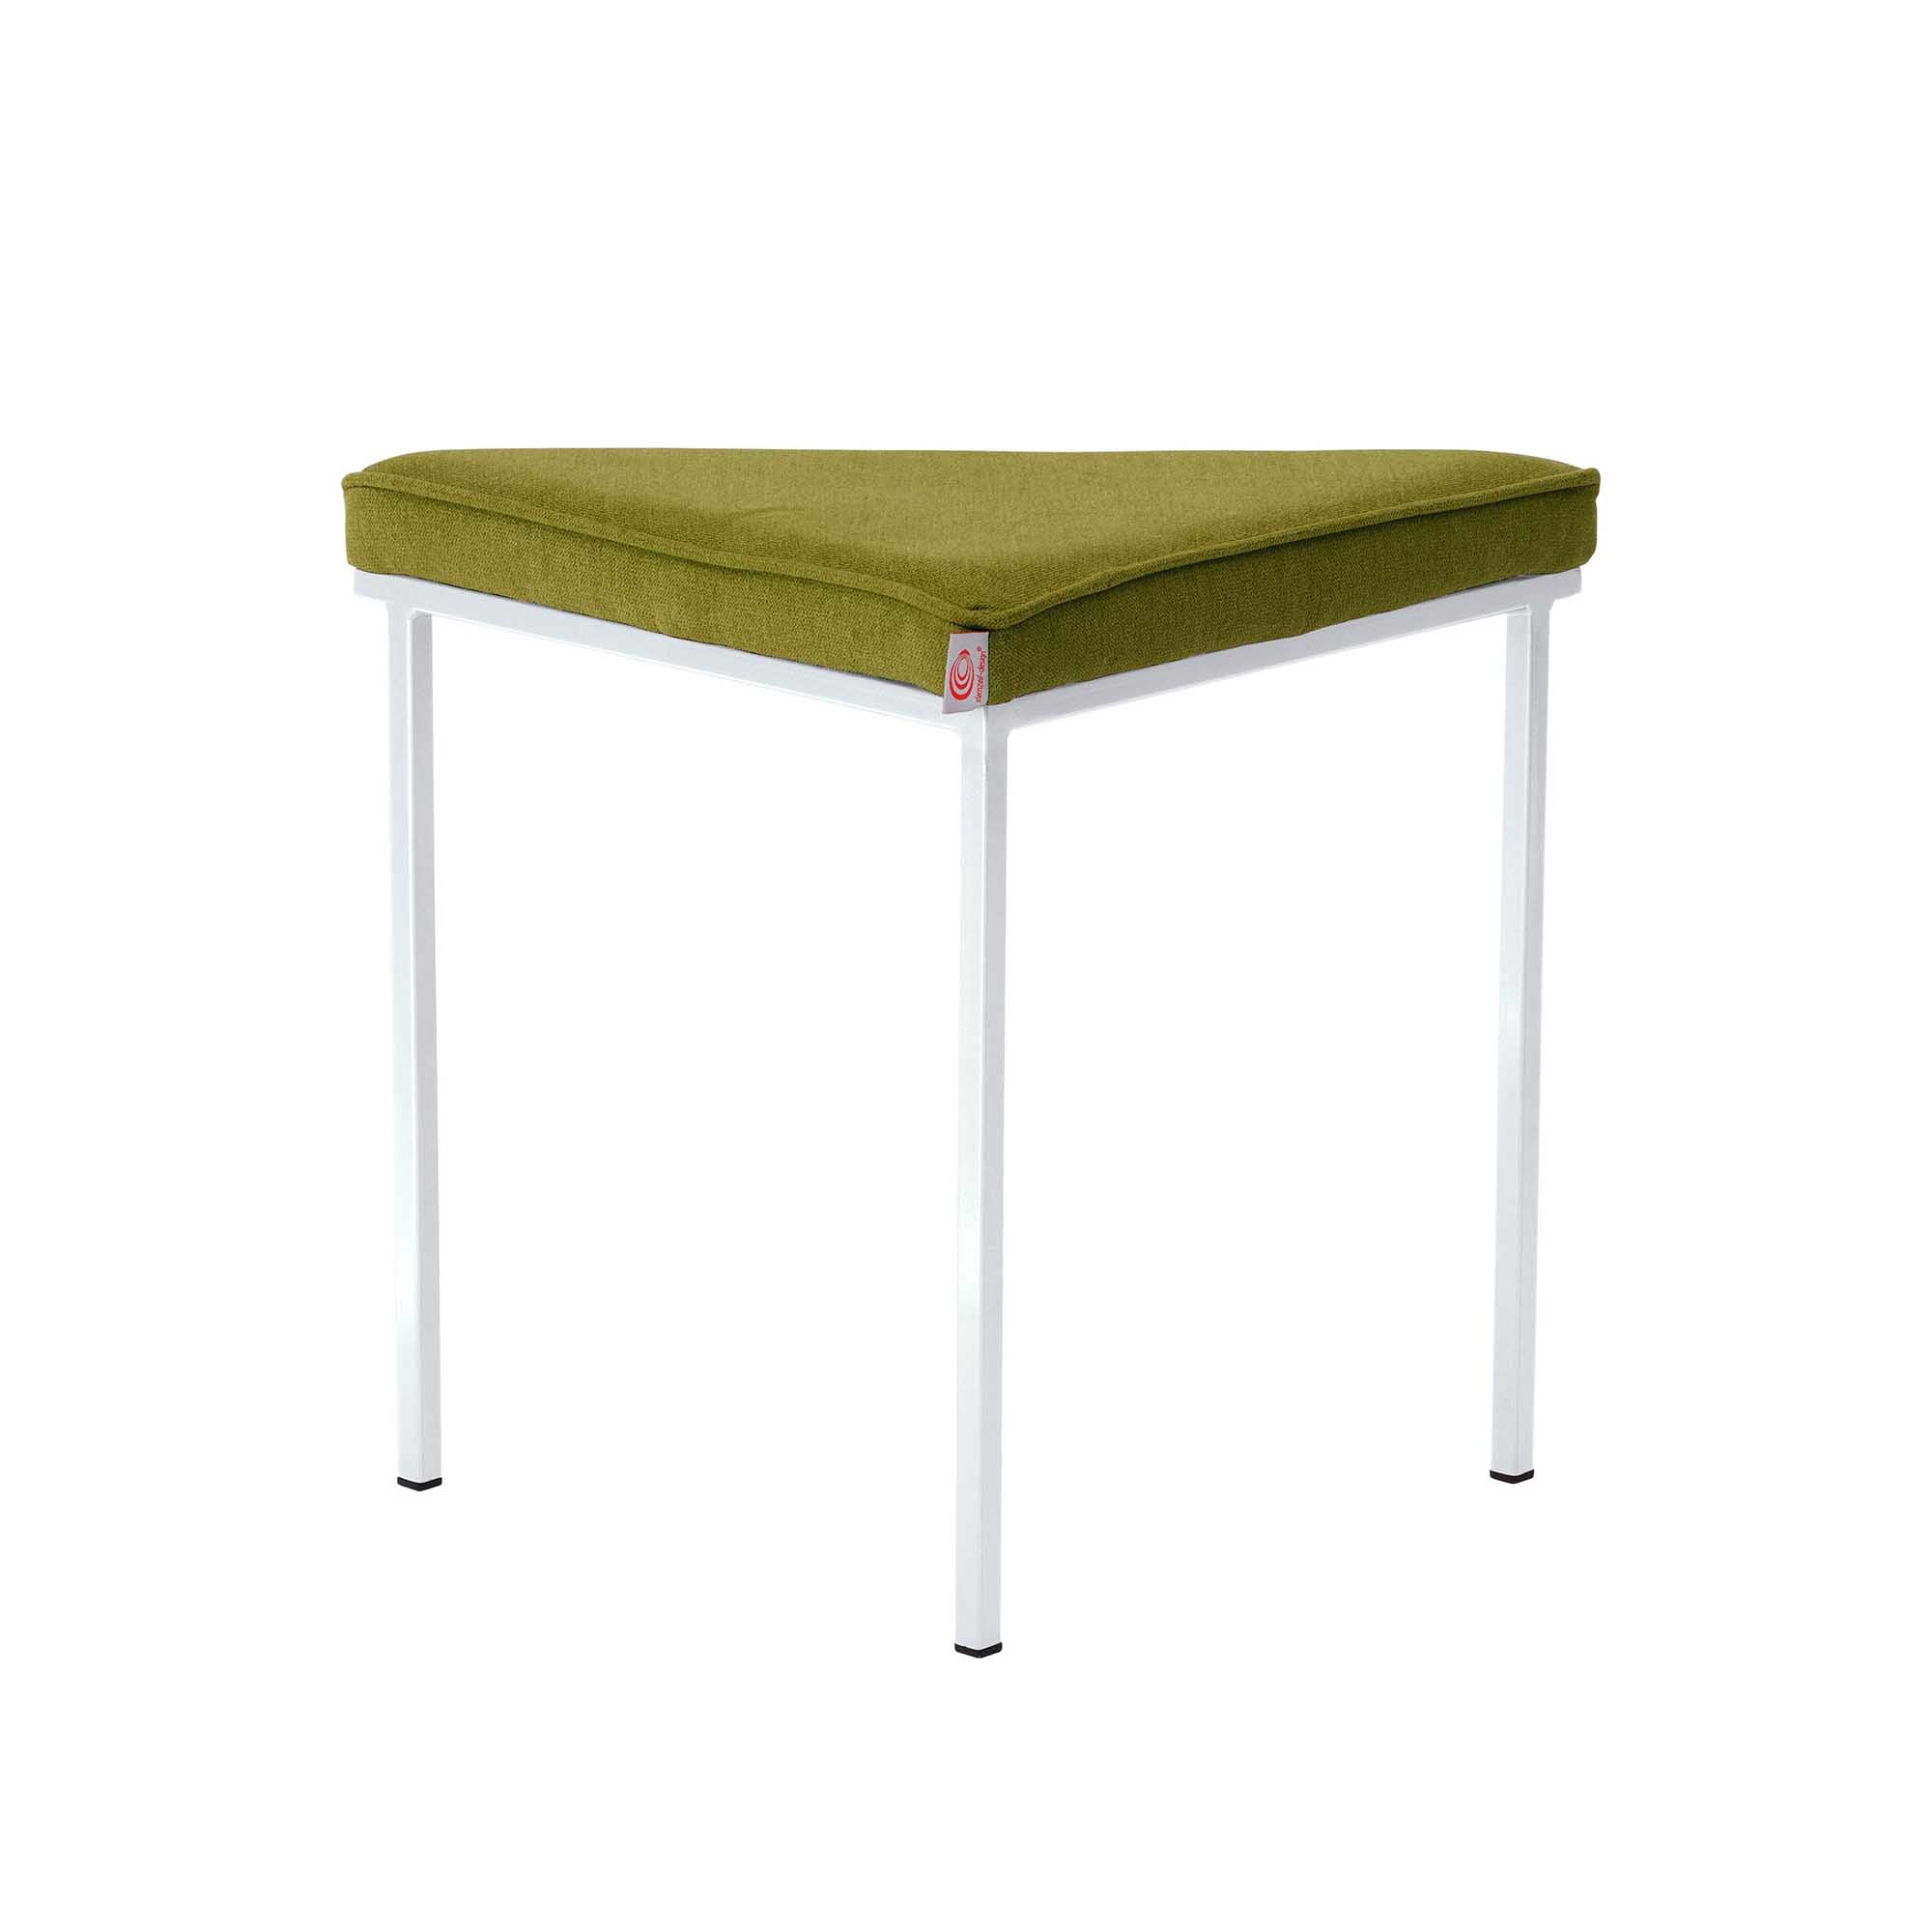 Tripod Stool, Powder-Coated Frame green upholstery, yellow frame, side view